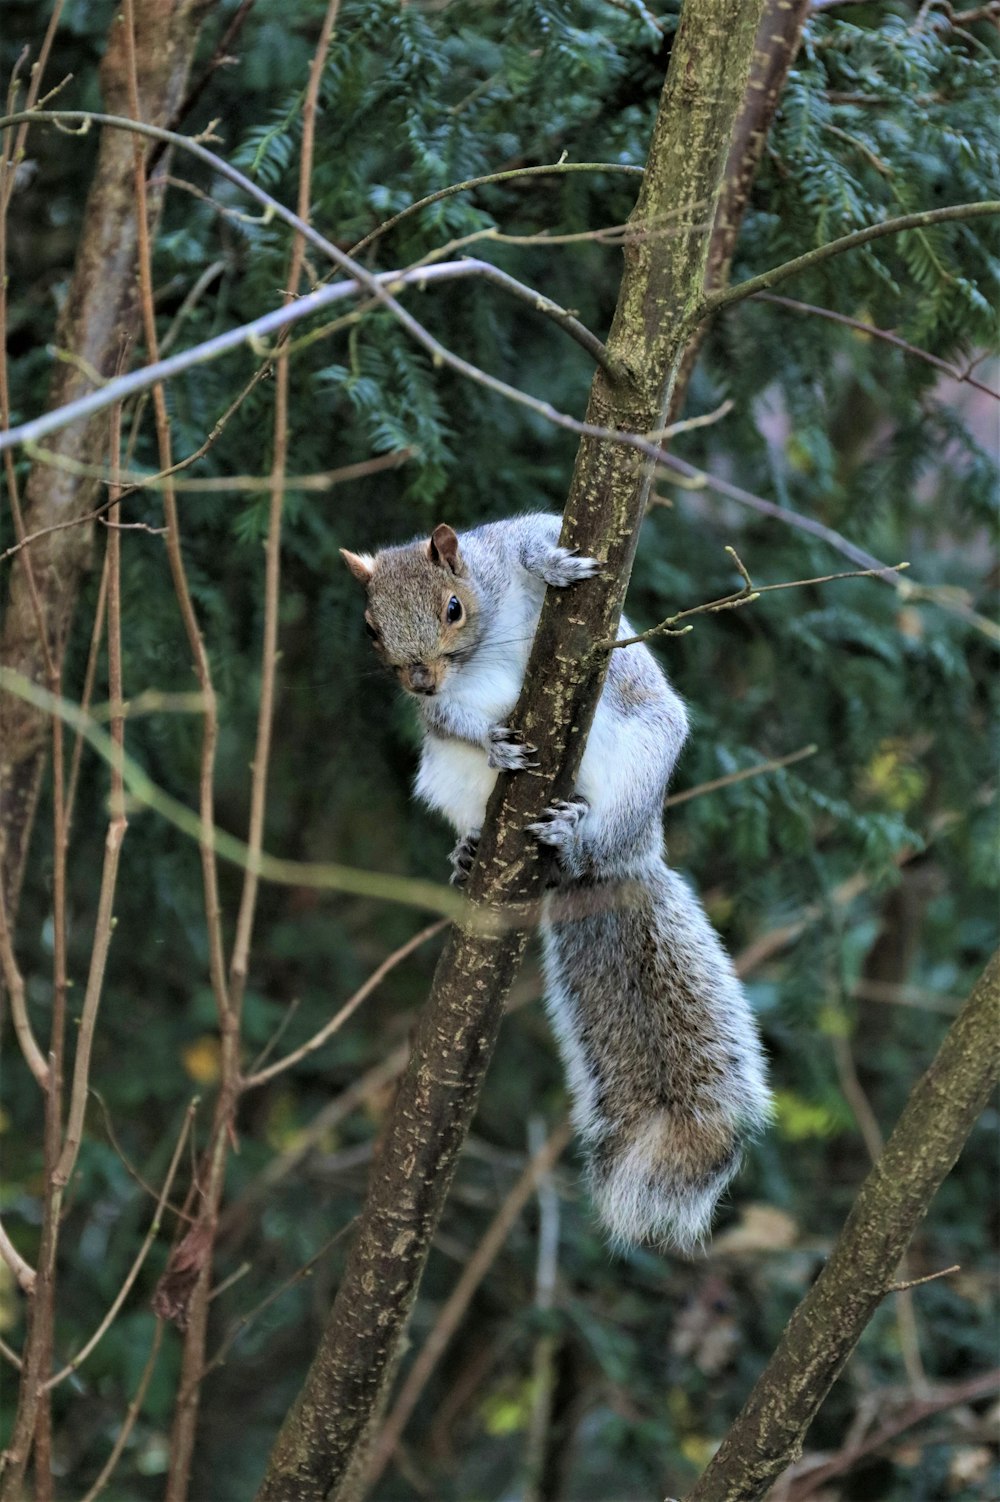 a squirrel is climbing up a tree branch